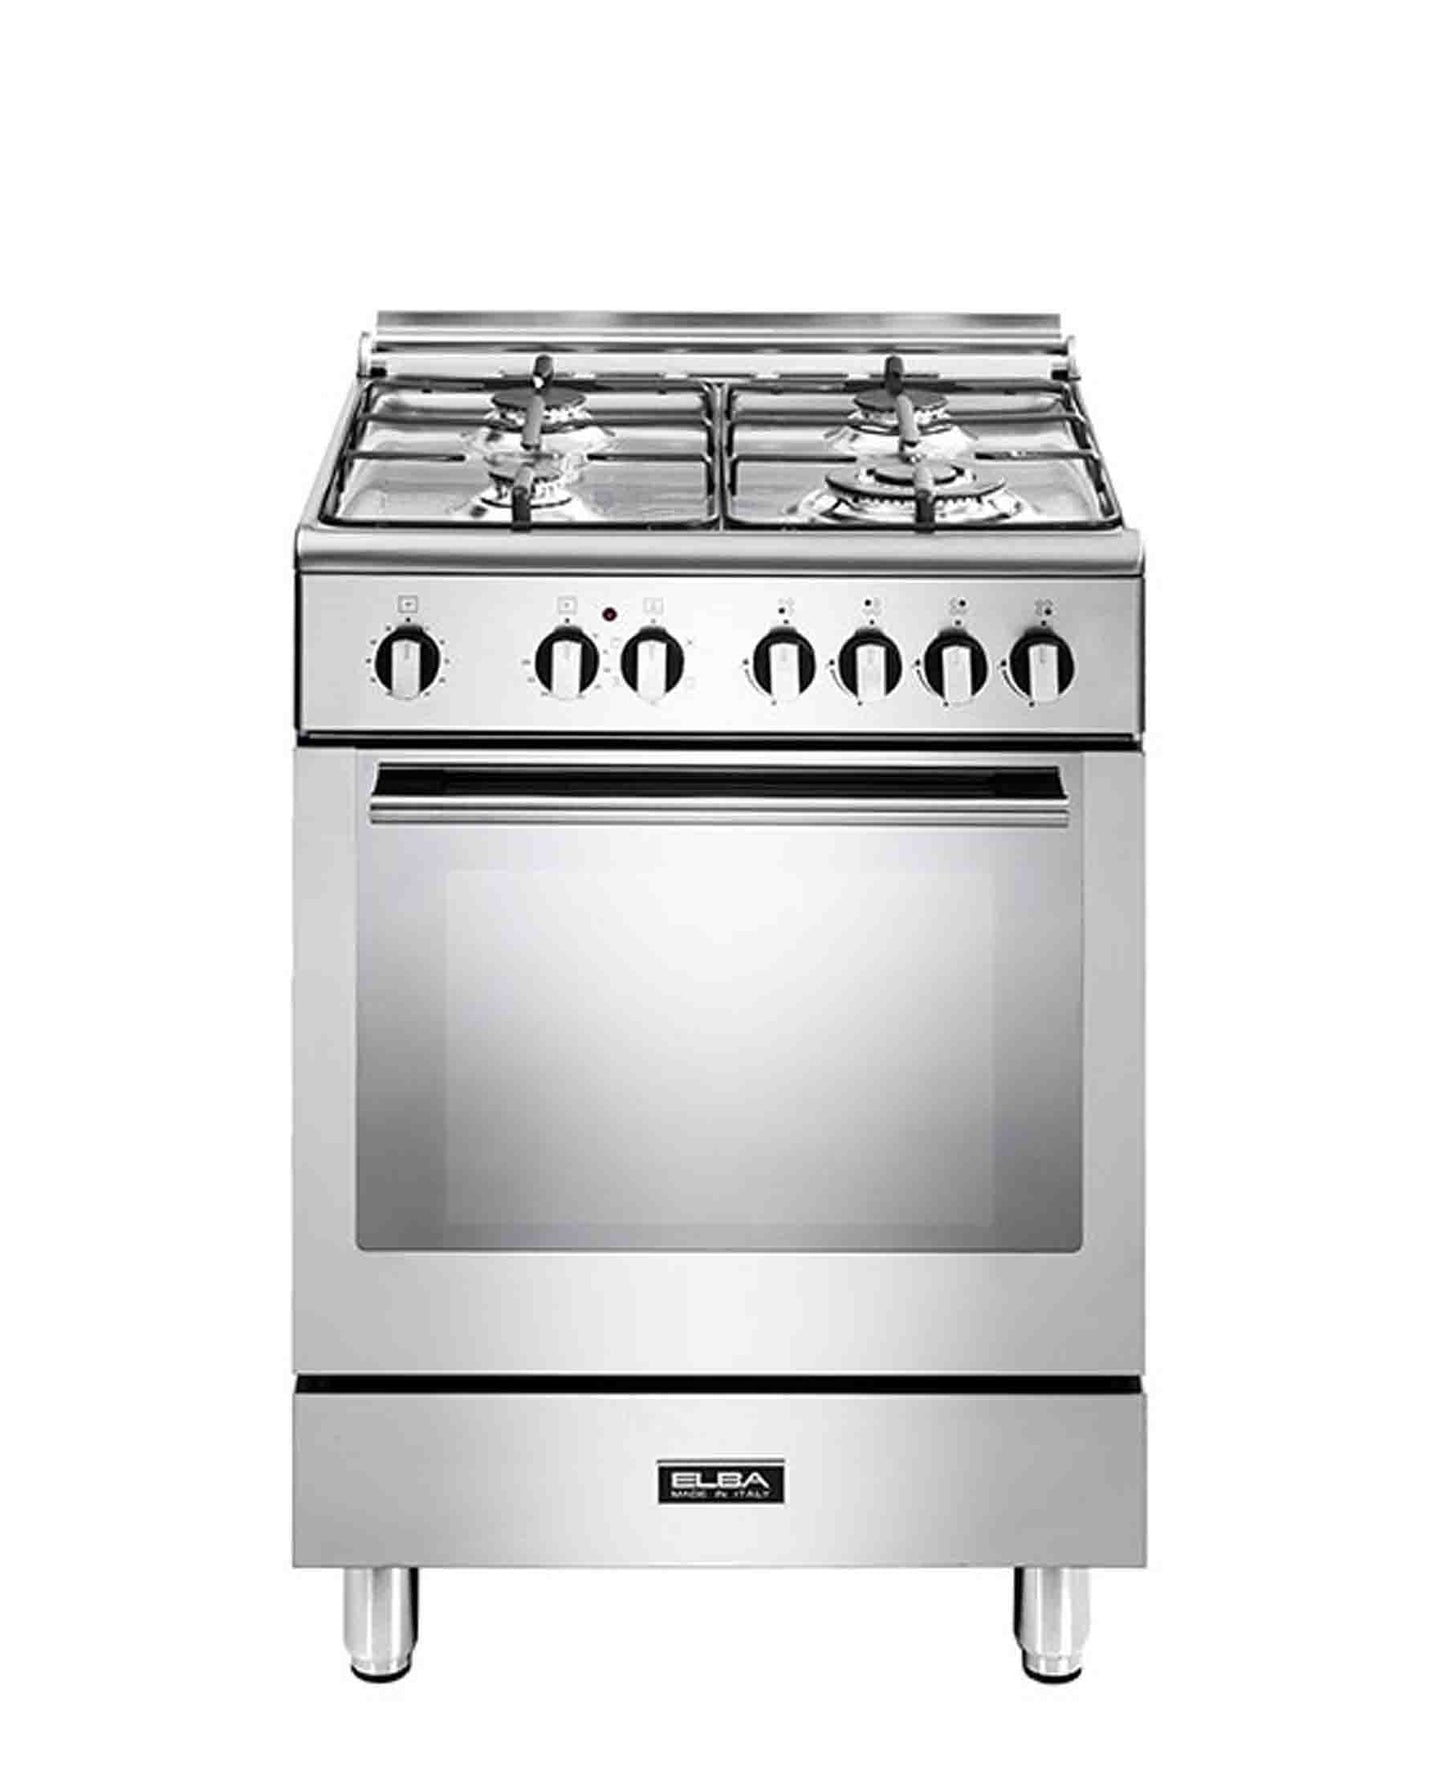 Elba Fusion 60cm 4 Burner Gas Cooker With Electric Oven - Silver